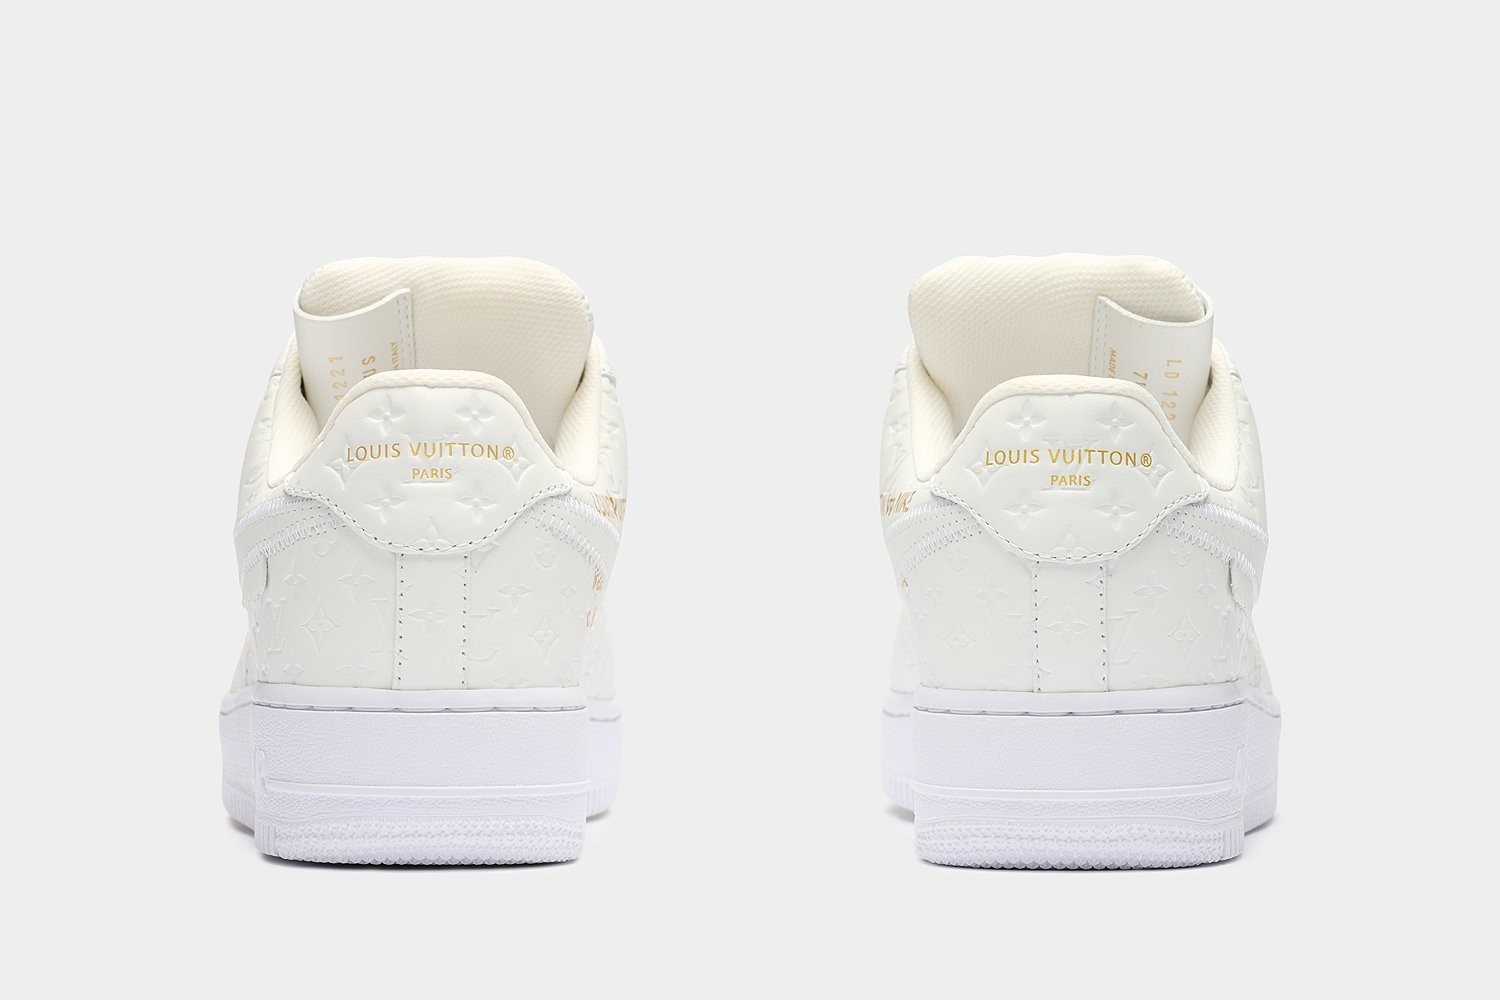 A complete series of nine Louis Vuitton and Nike “Air Force 1” by Virgil Abloh - Image 8 of 50